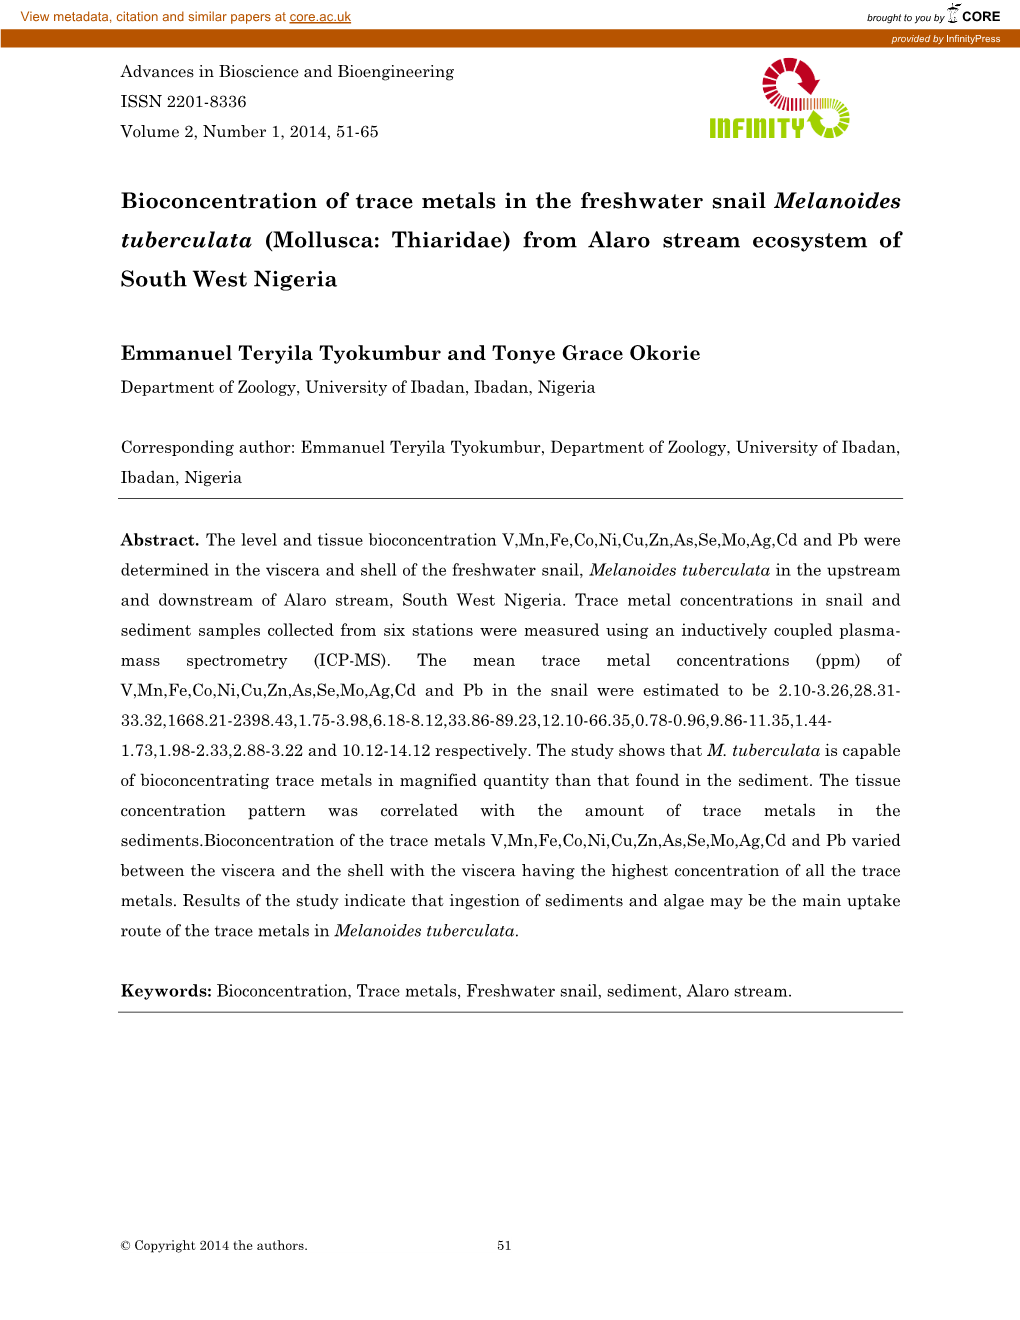 Bioconcentration of Trace Metals in the Freshwater Snail Melanoides Tuberculata (Mollusca: Thiaridae) from Alaro Stream Ecosystem of South West Nigeria